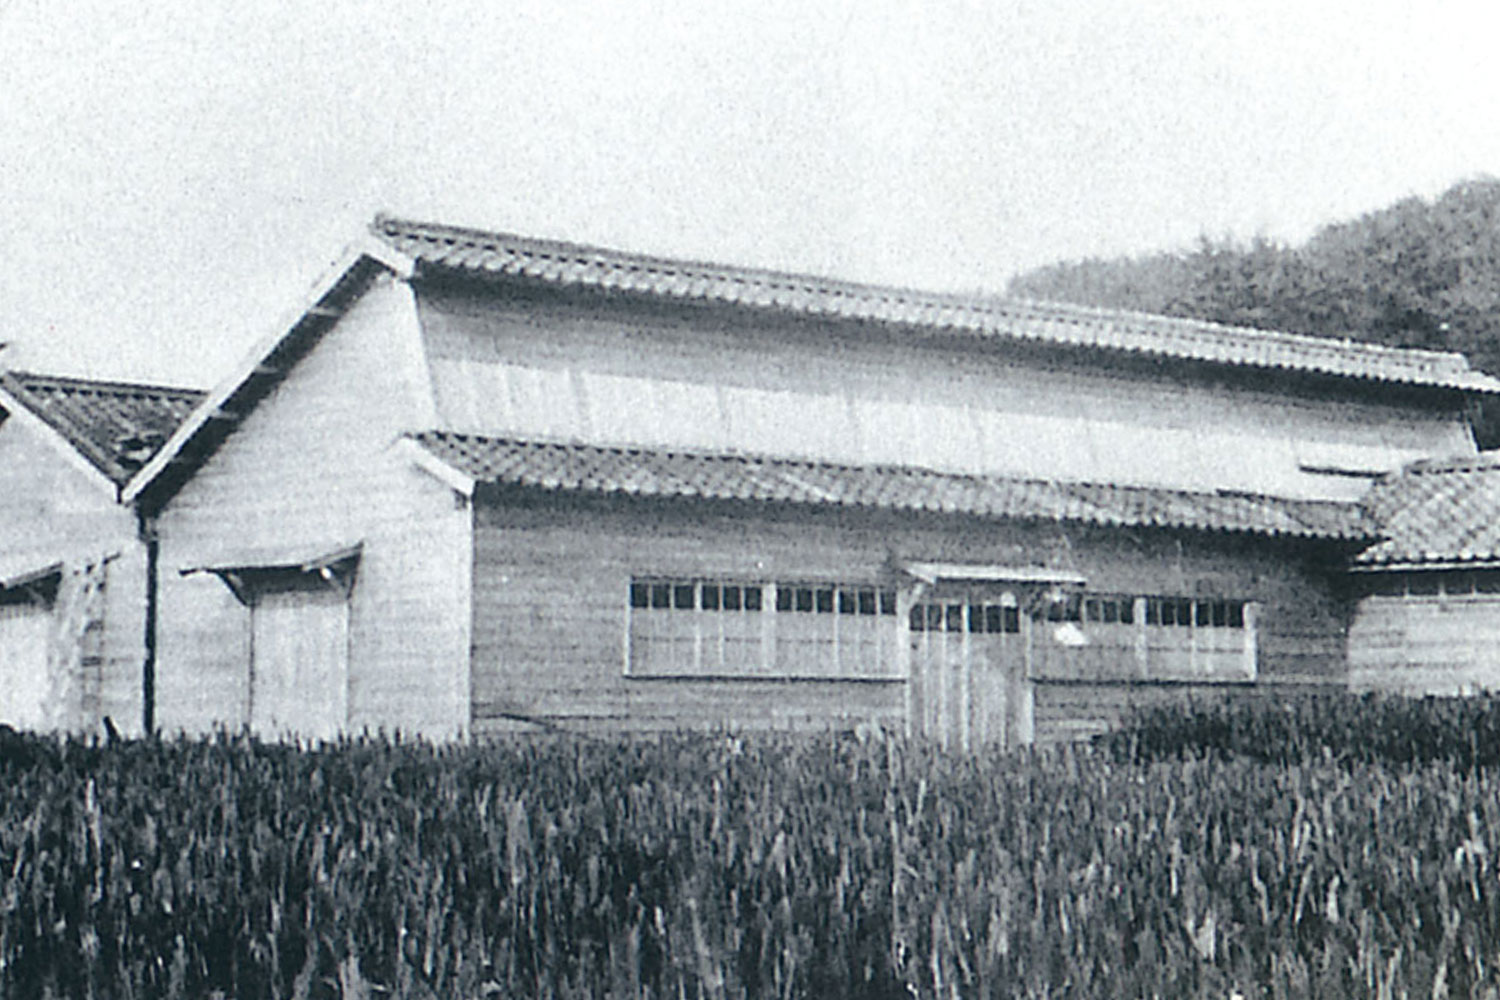 Exterior of plant when the company was founded